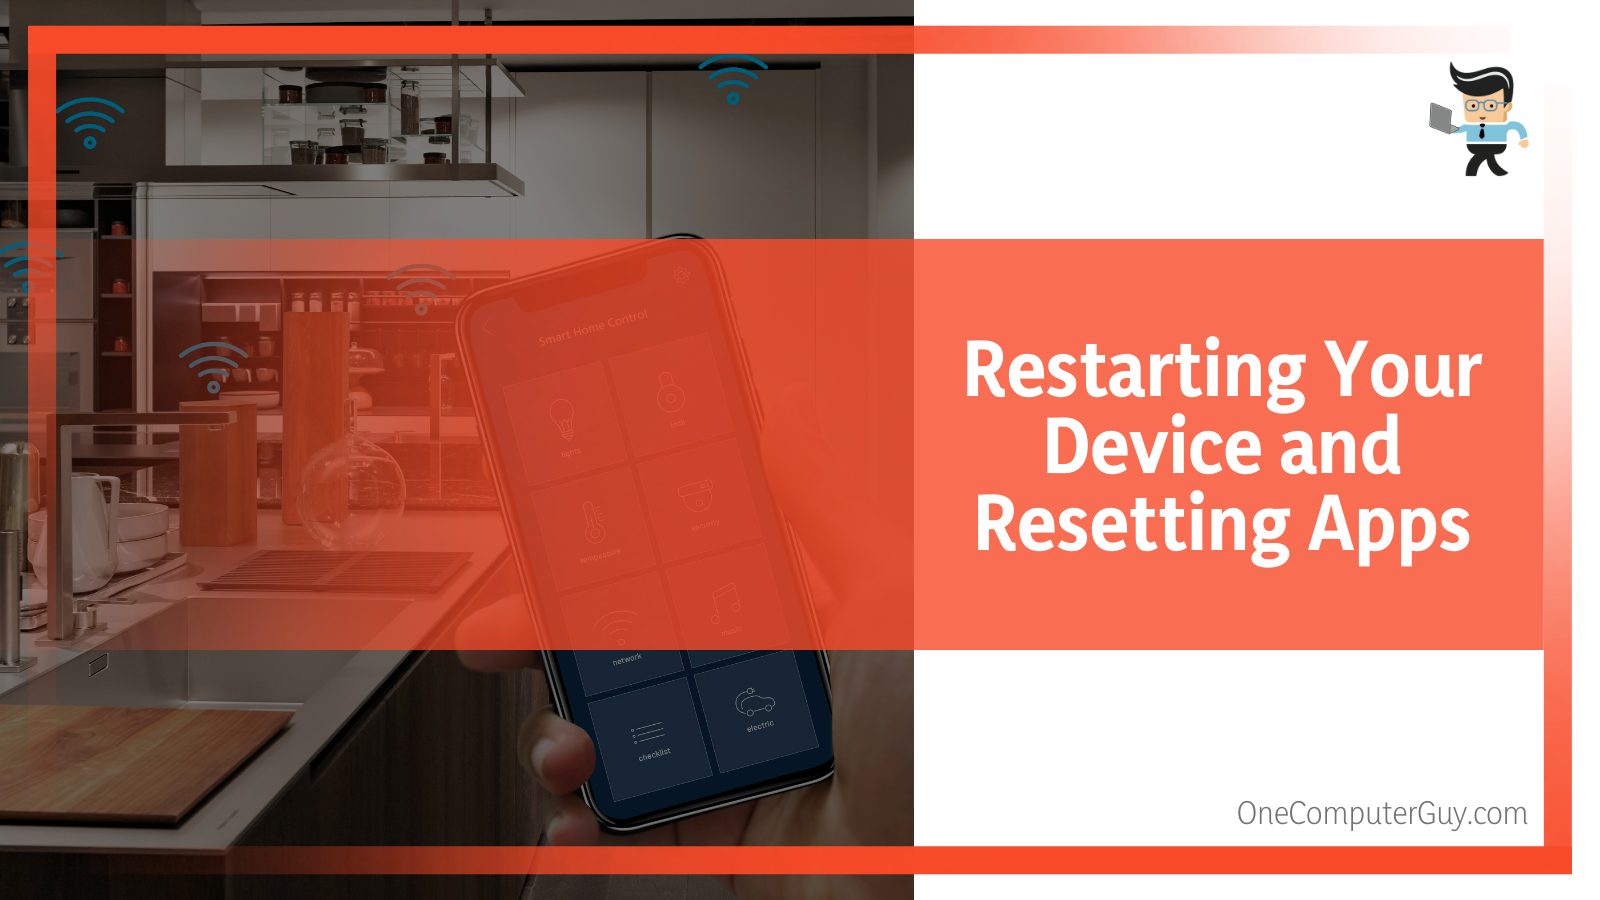 Restarting Your Device and Resetting Apps